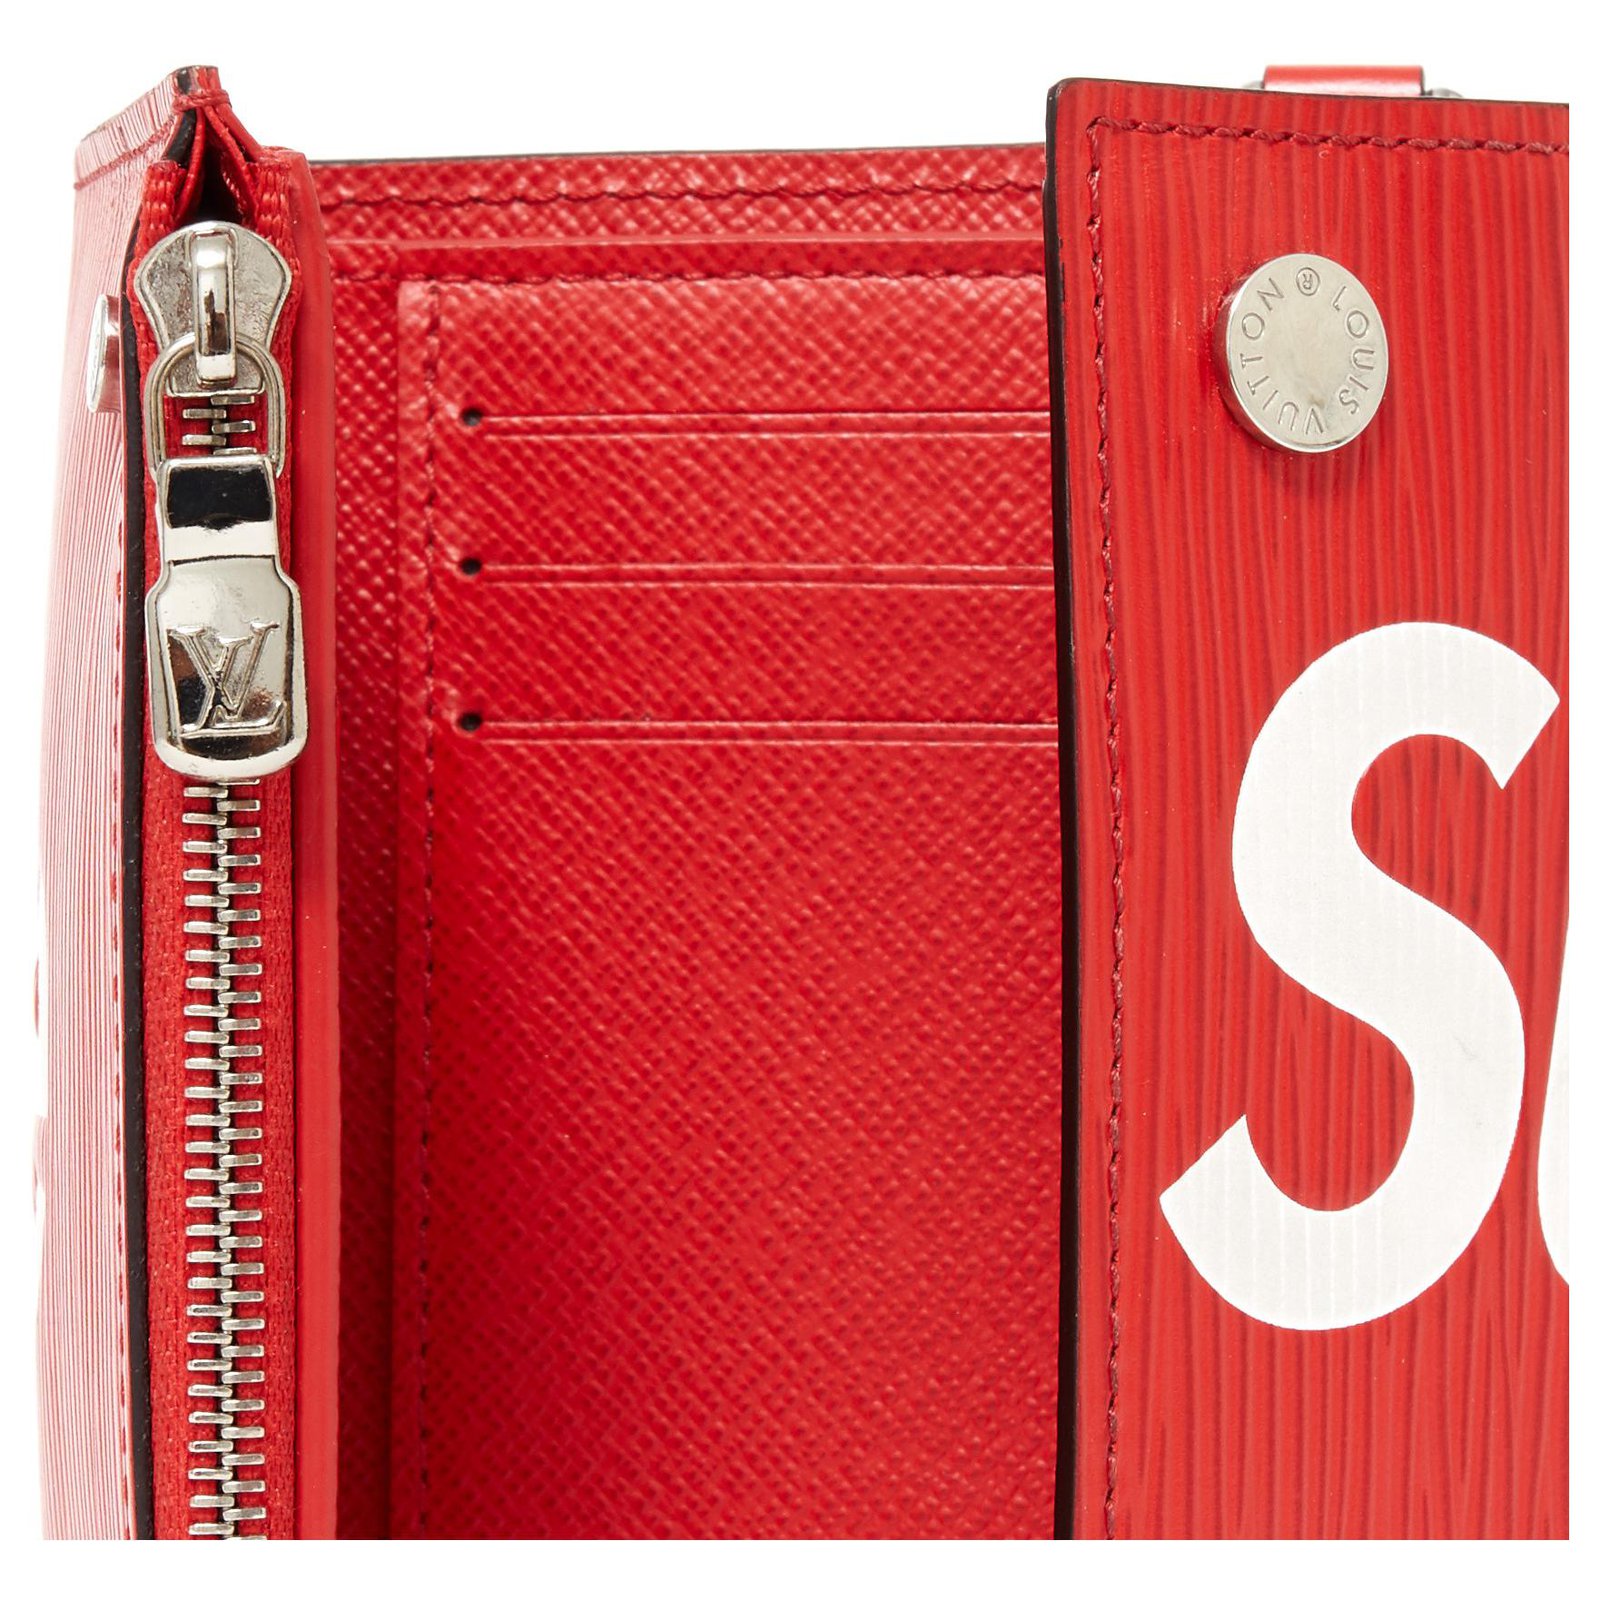 Louis Vuitton x Supreme - Authenticated Wallet - Leather Red Plain for Women, Never Worn